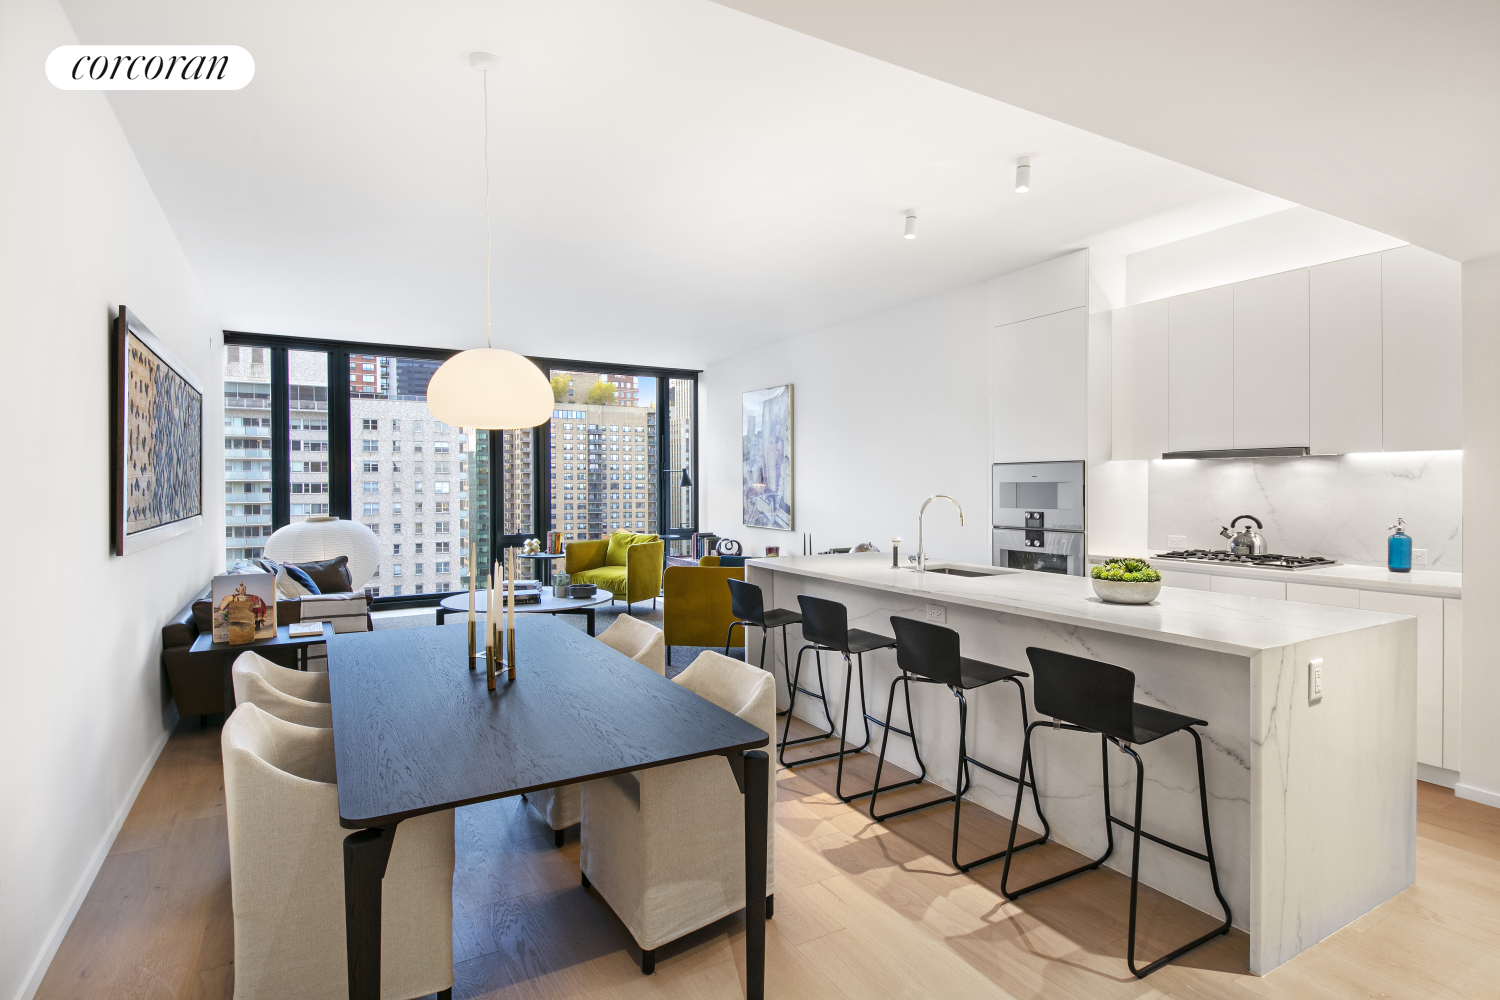 695 1st Avenue 38G, Murray Hill, Midtown East, NYC - 2 Bedrooms  
2.5 Bathrooms  
4 Rooms - 